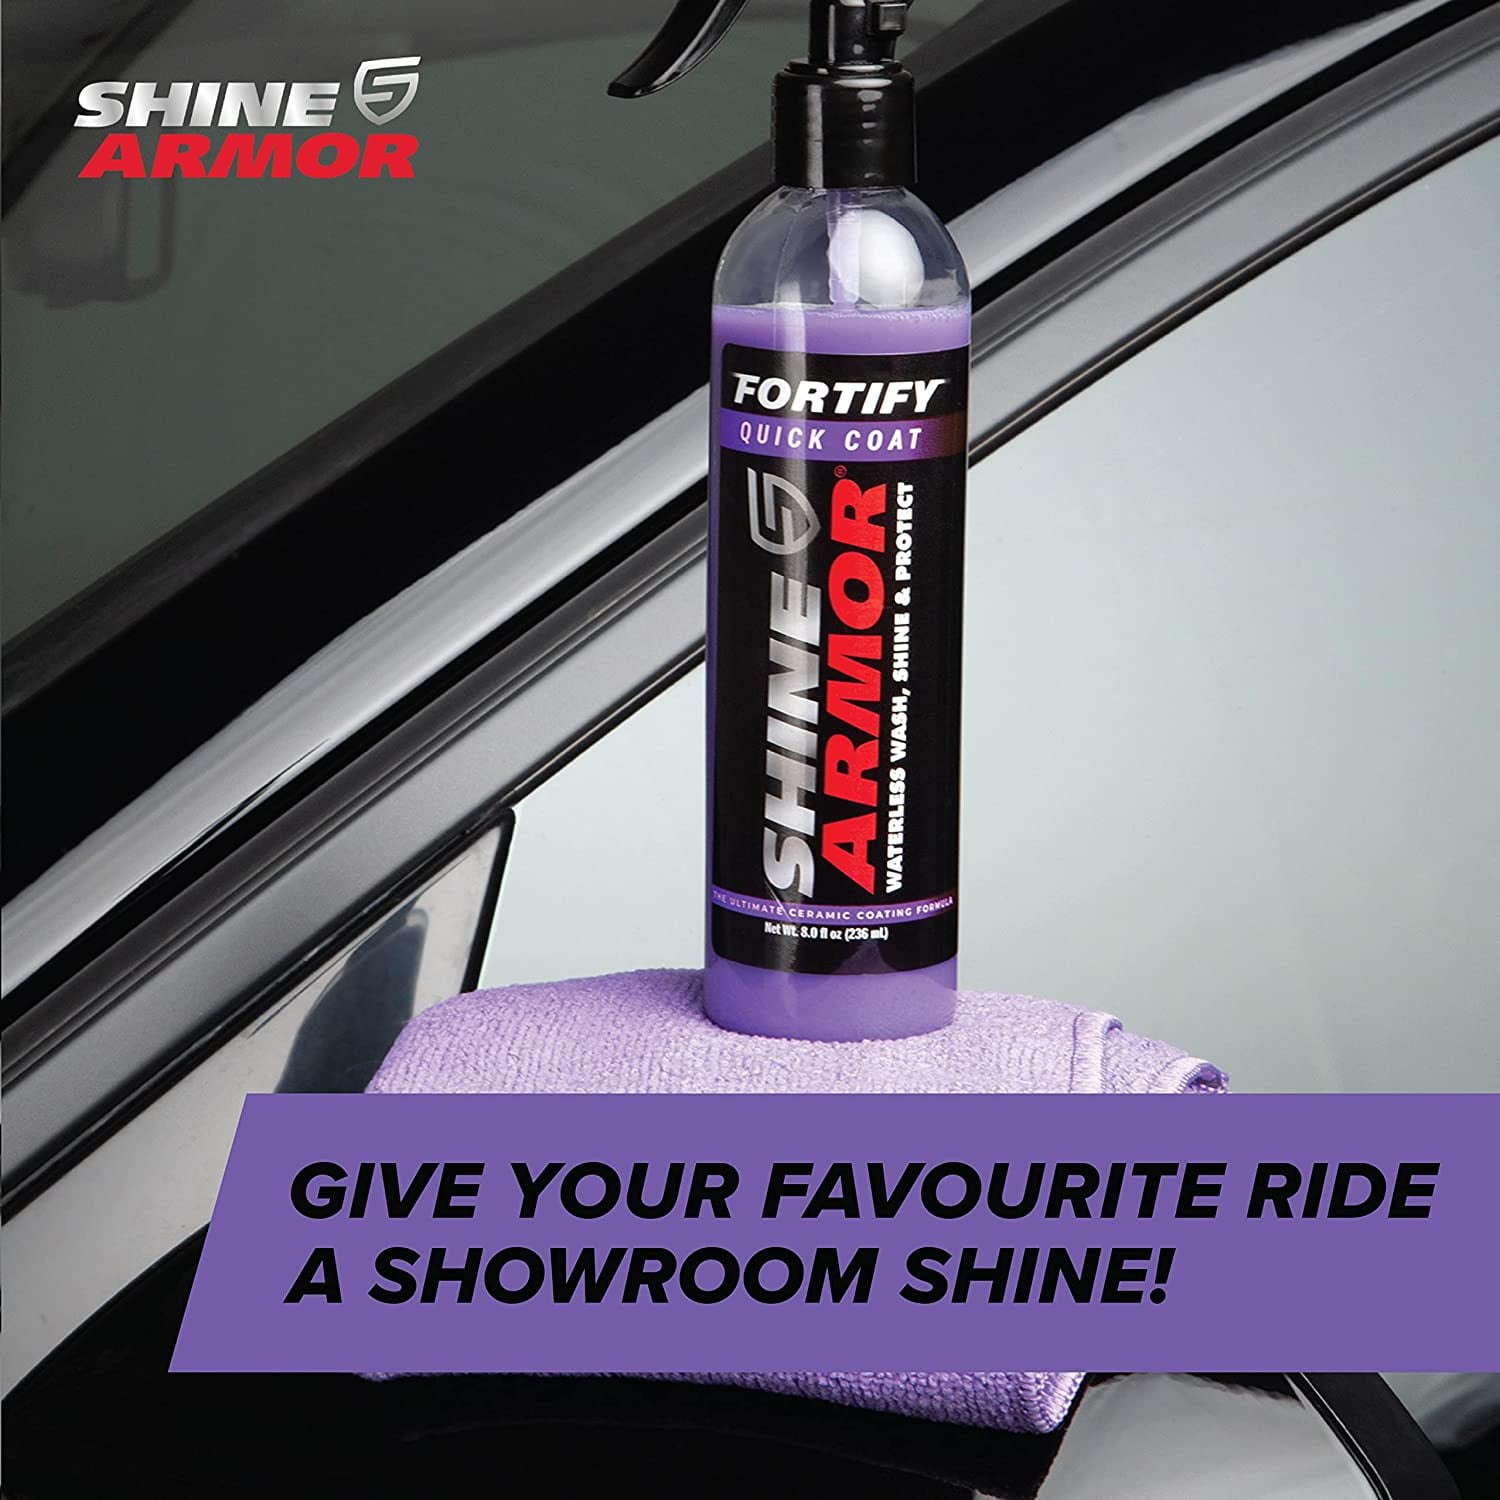  SHINE ARMOR Ceramic Coating Top Coat for Cars Fortify Quick Coat  Car Wax Polish Spray Waterless Wash & Wax Hydrophobic Top Coat Polish &  Polymer Paint Sealant Detail Protection 16 Fl